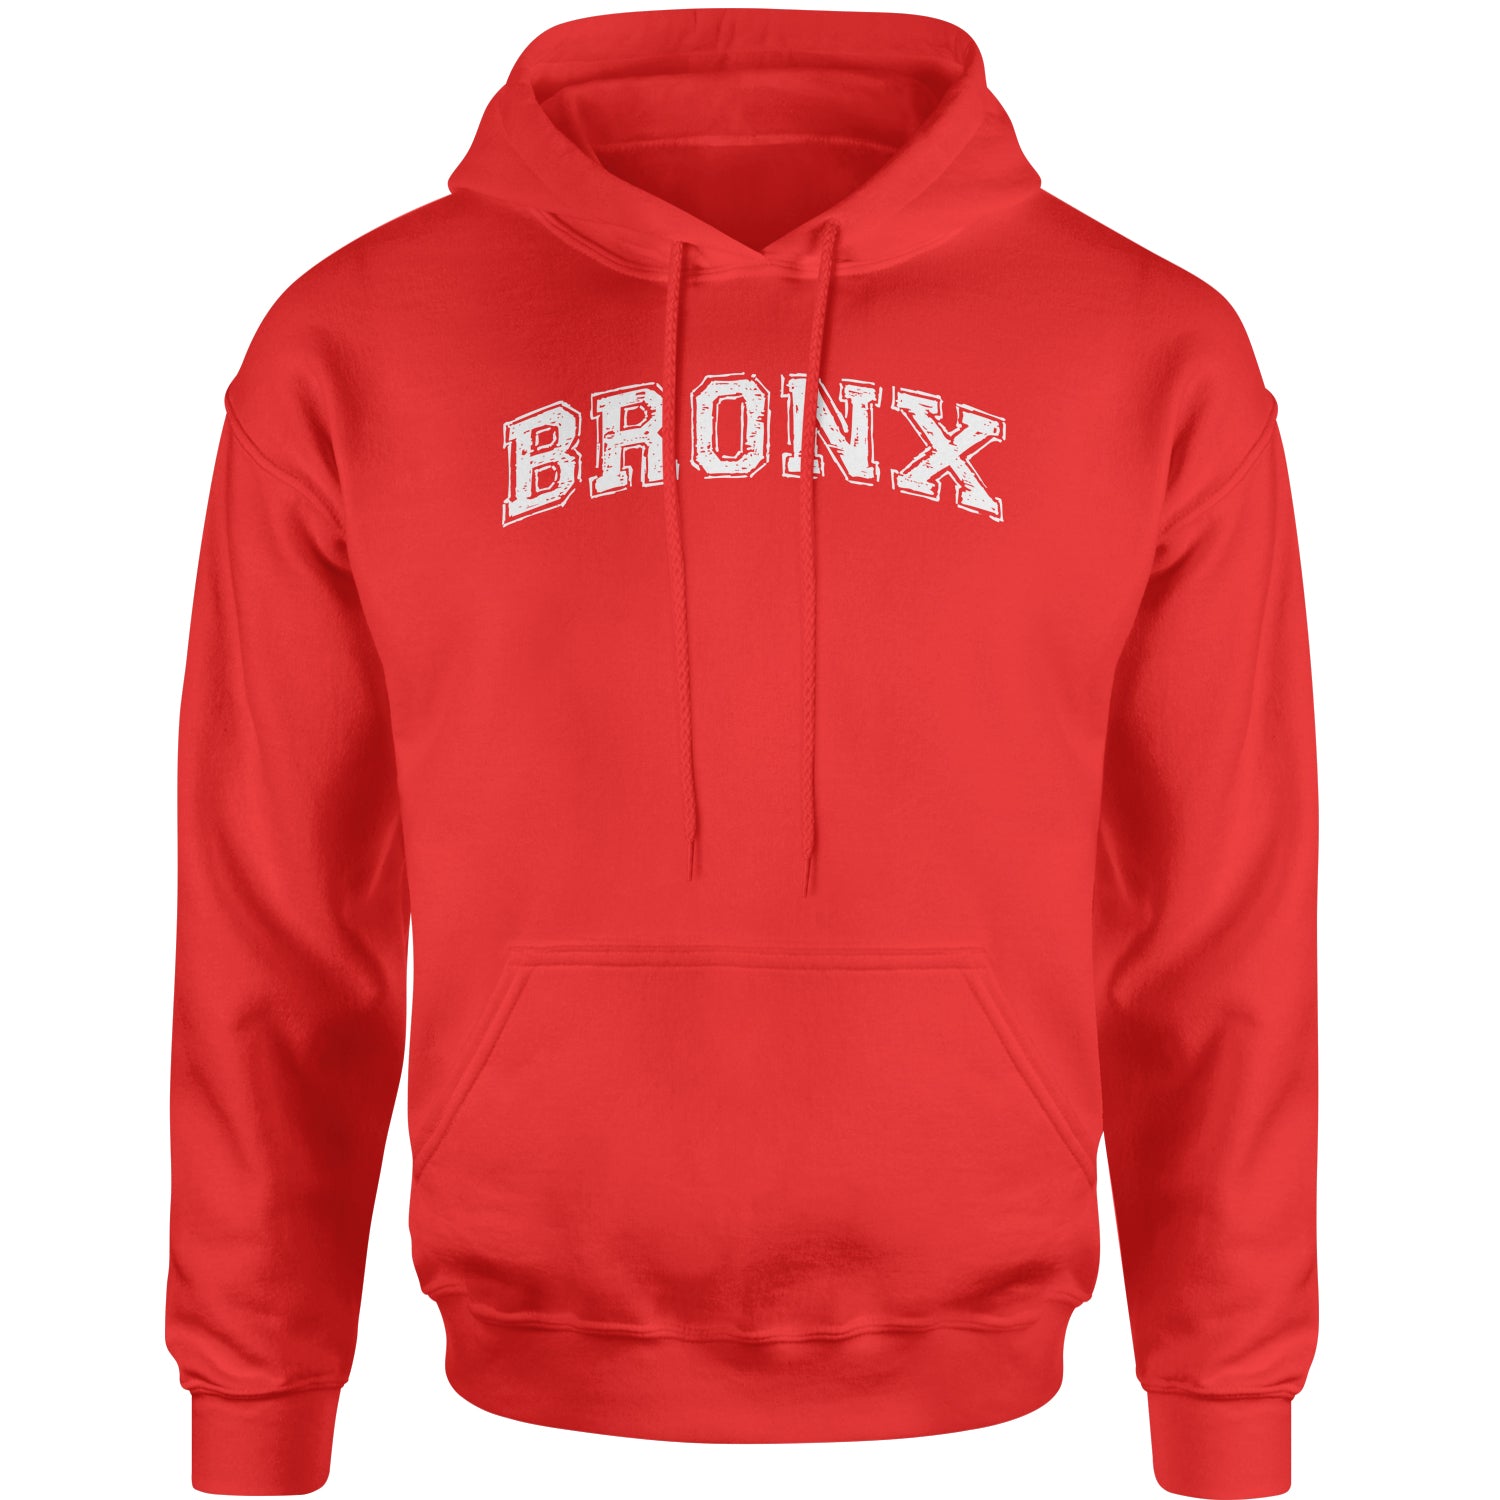 Bronx - From The Block Adult Hoodie Sweatshirt b, cardi, concert, its, Jennifer, lopez, merch, my, party, tour by Expression Tees